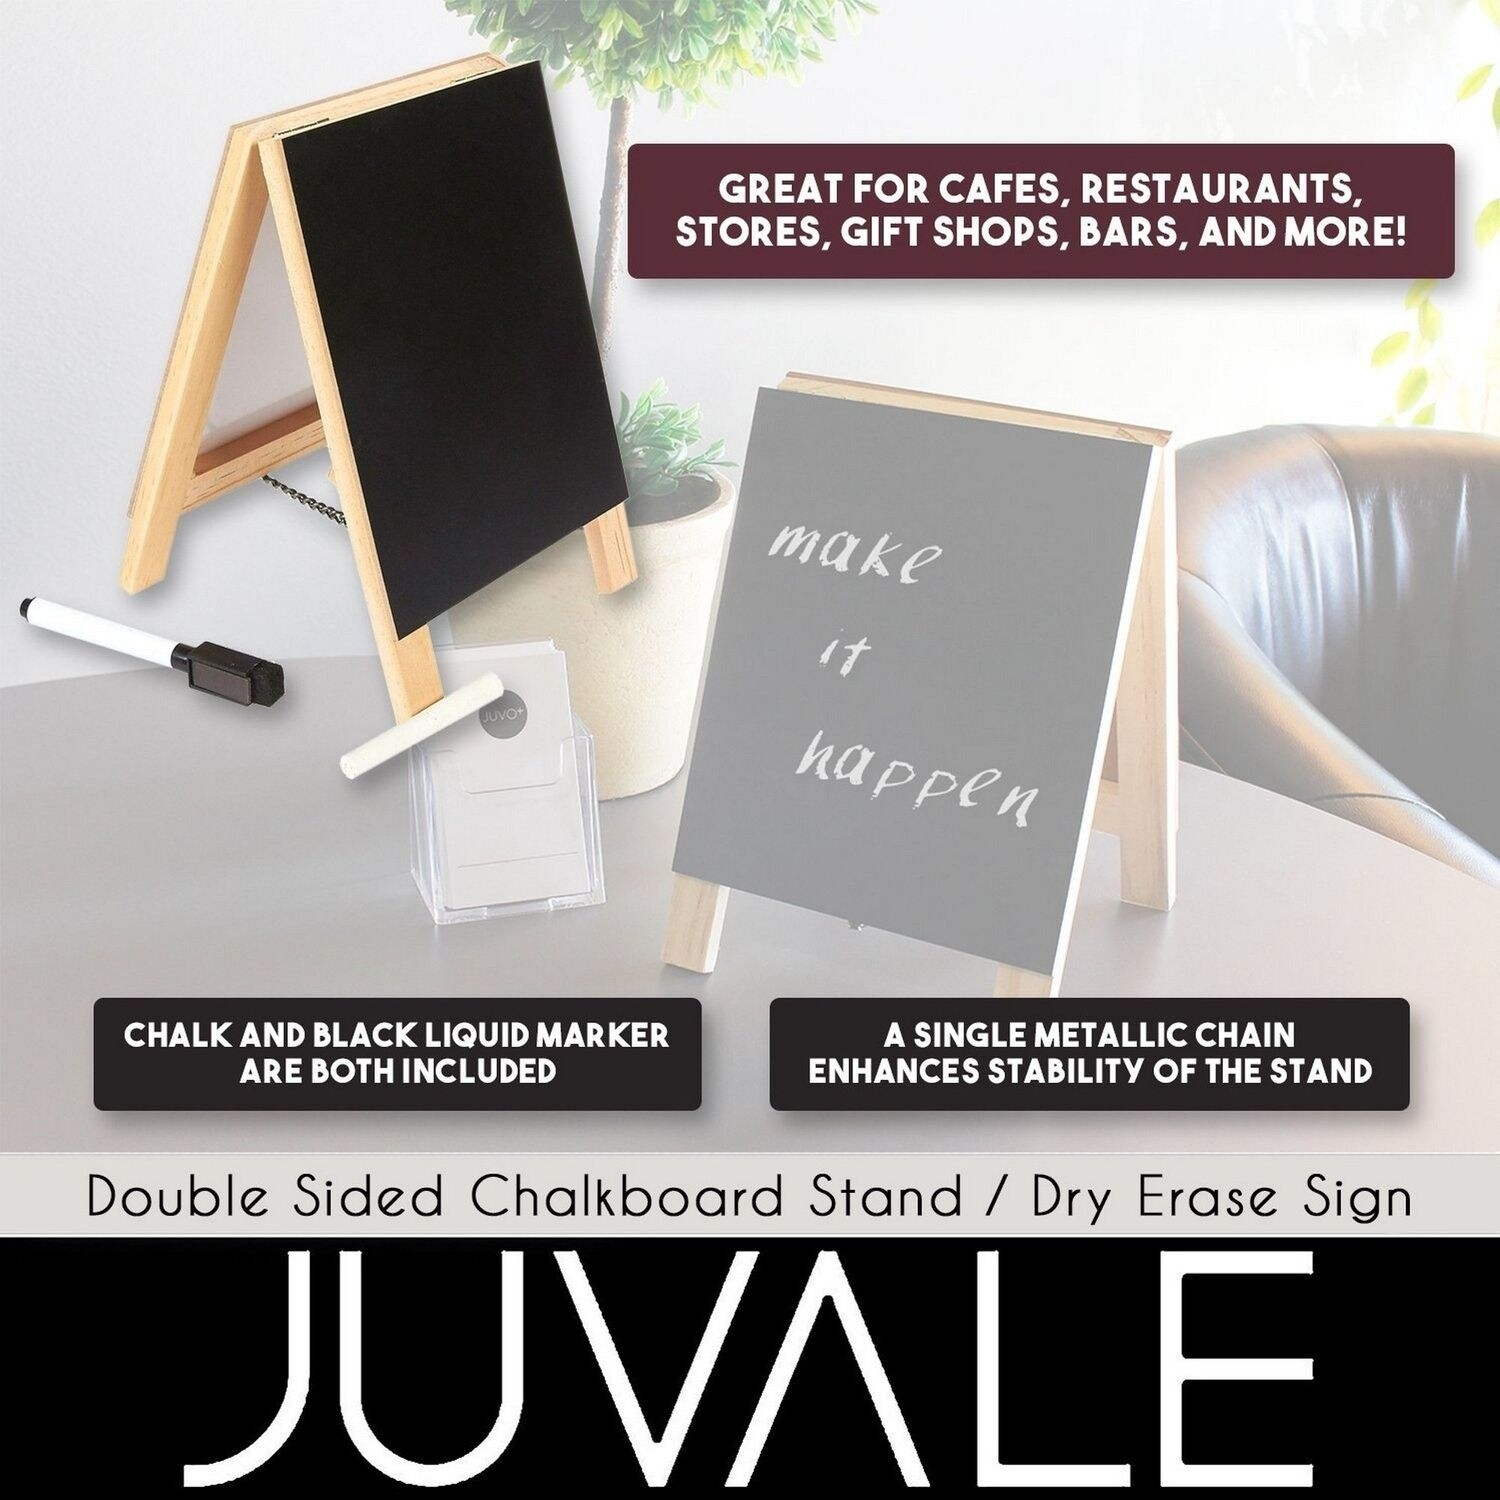 Juvale Double Sided Chalkboard Stand / Dry Erase Sign - Dual Wooden Chalkboard Easel & White Board Sign Stand - for Cafes, Restaurants